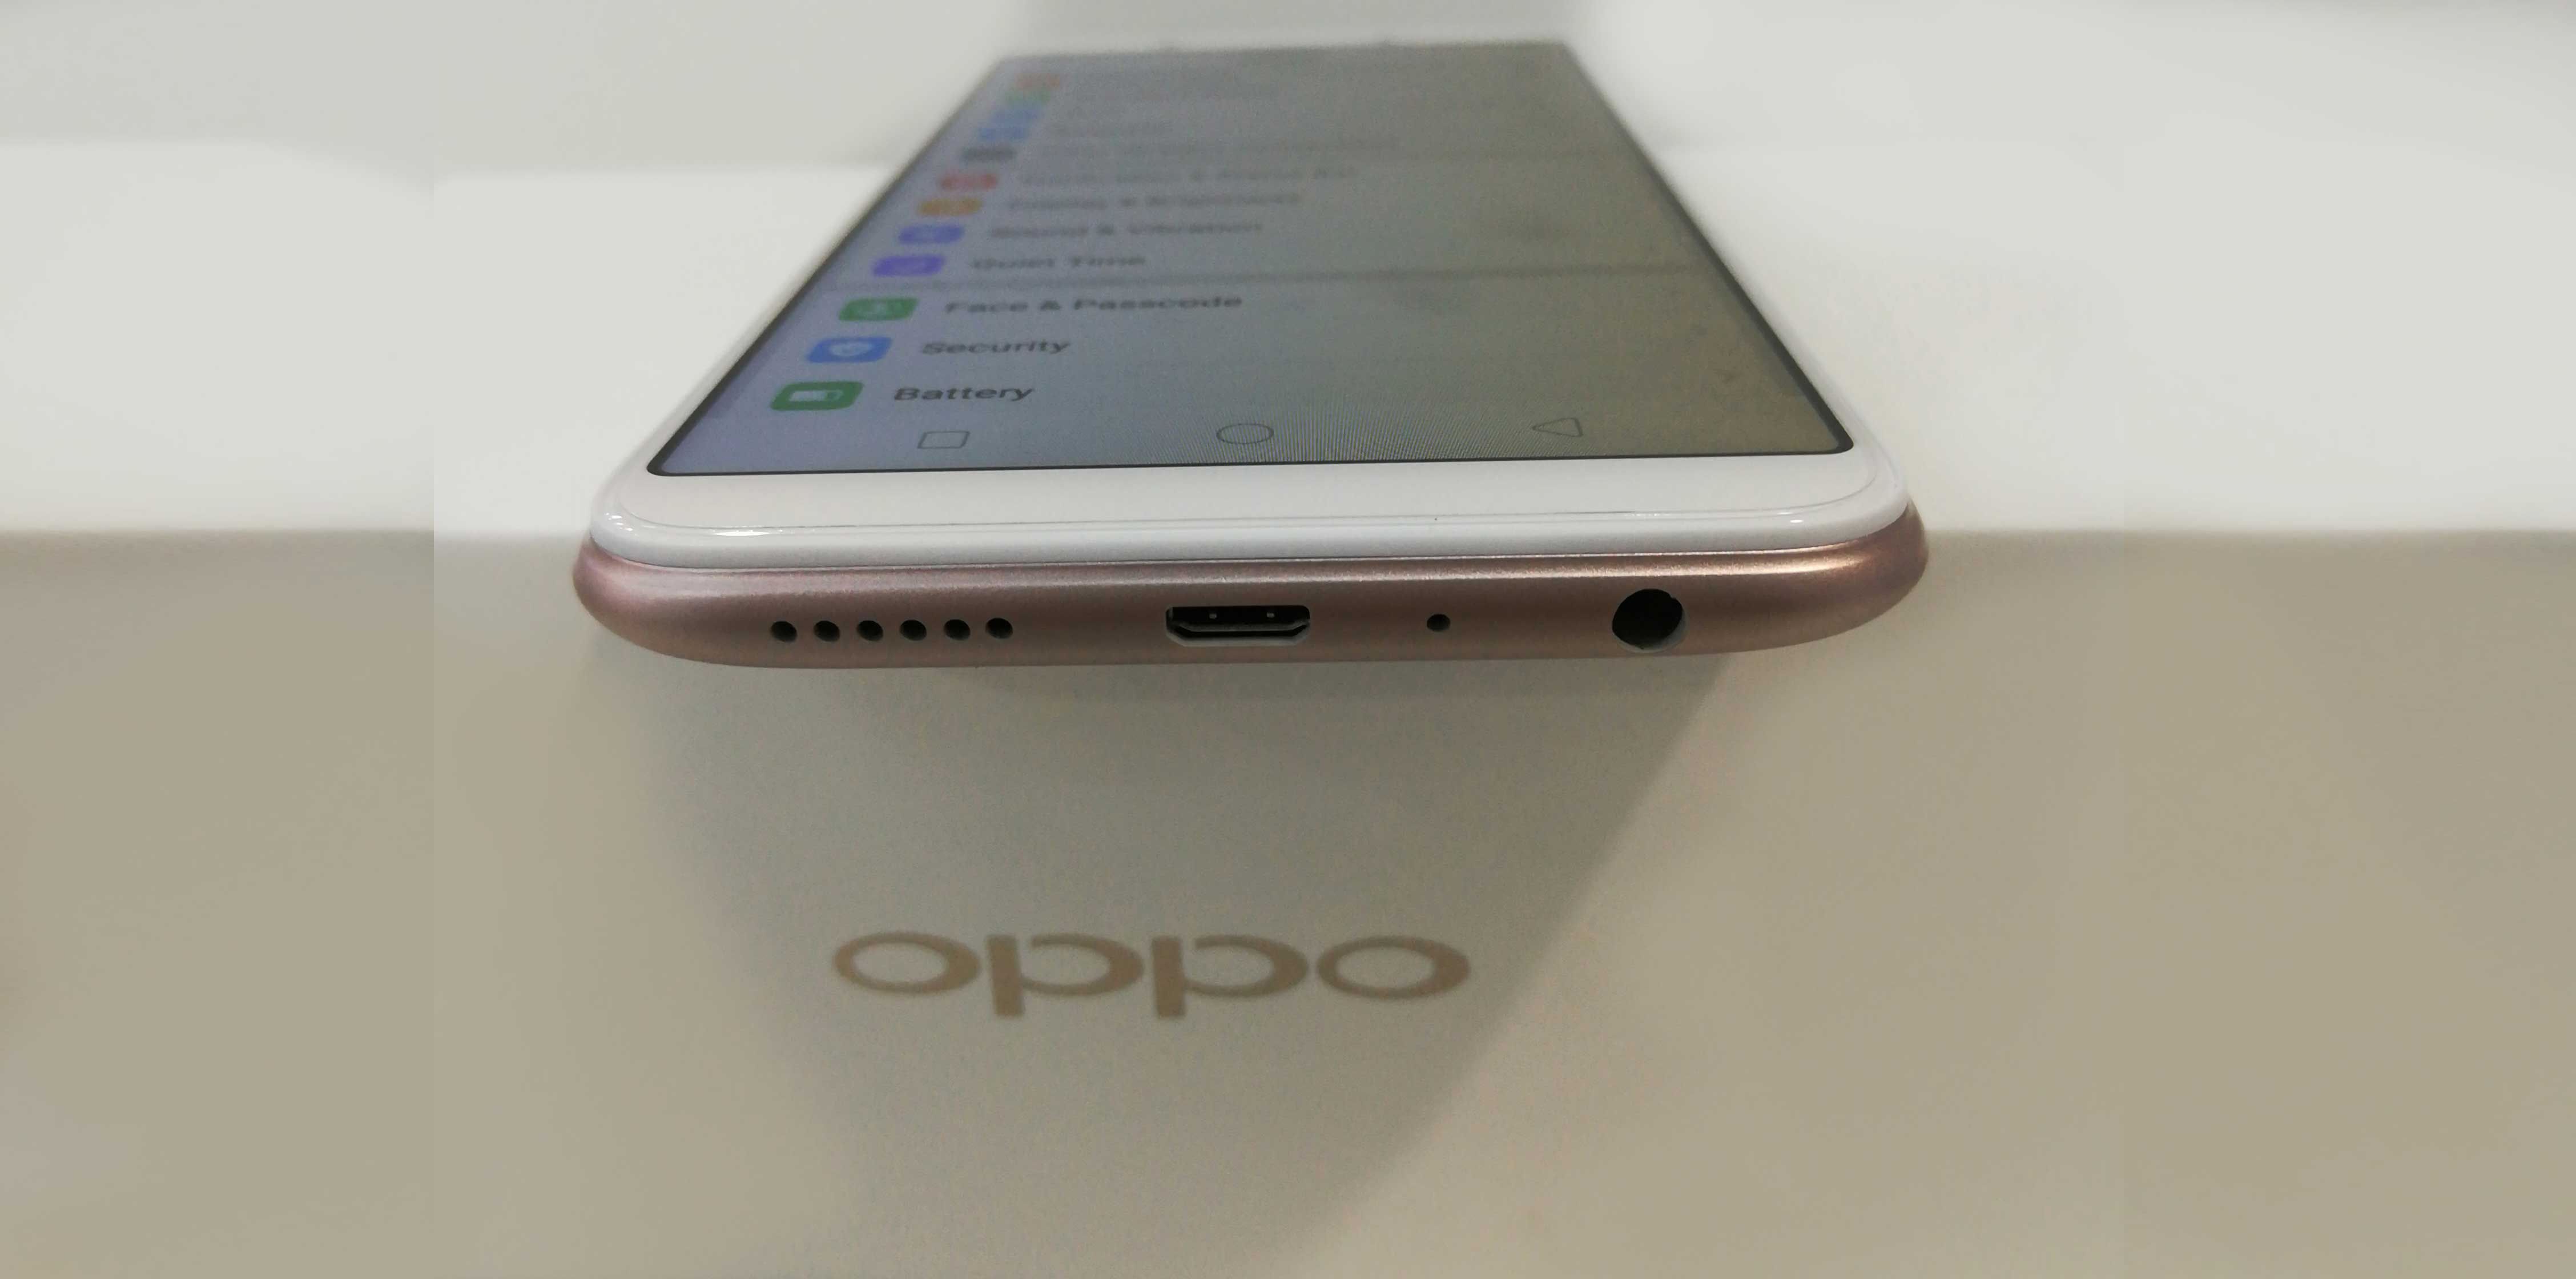 oppo mobile A83 (CPH1729)specifications and image